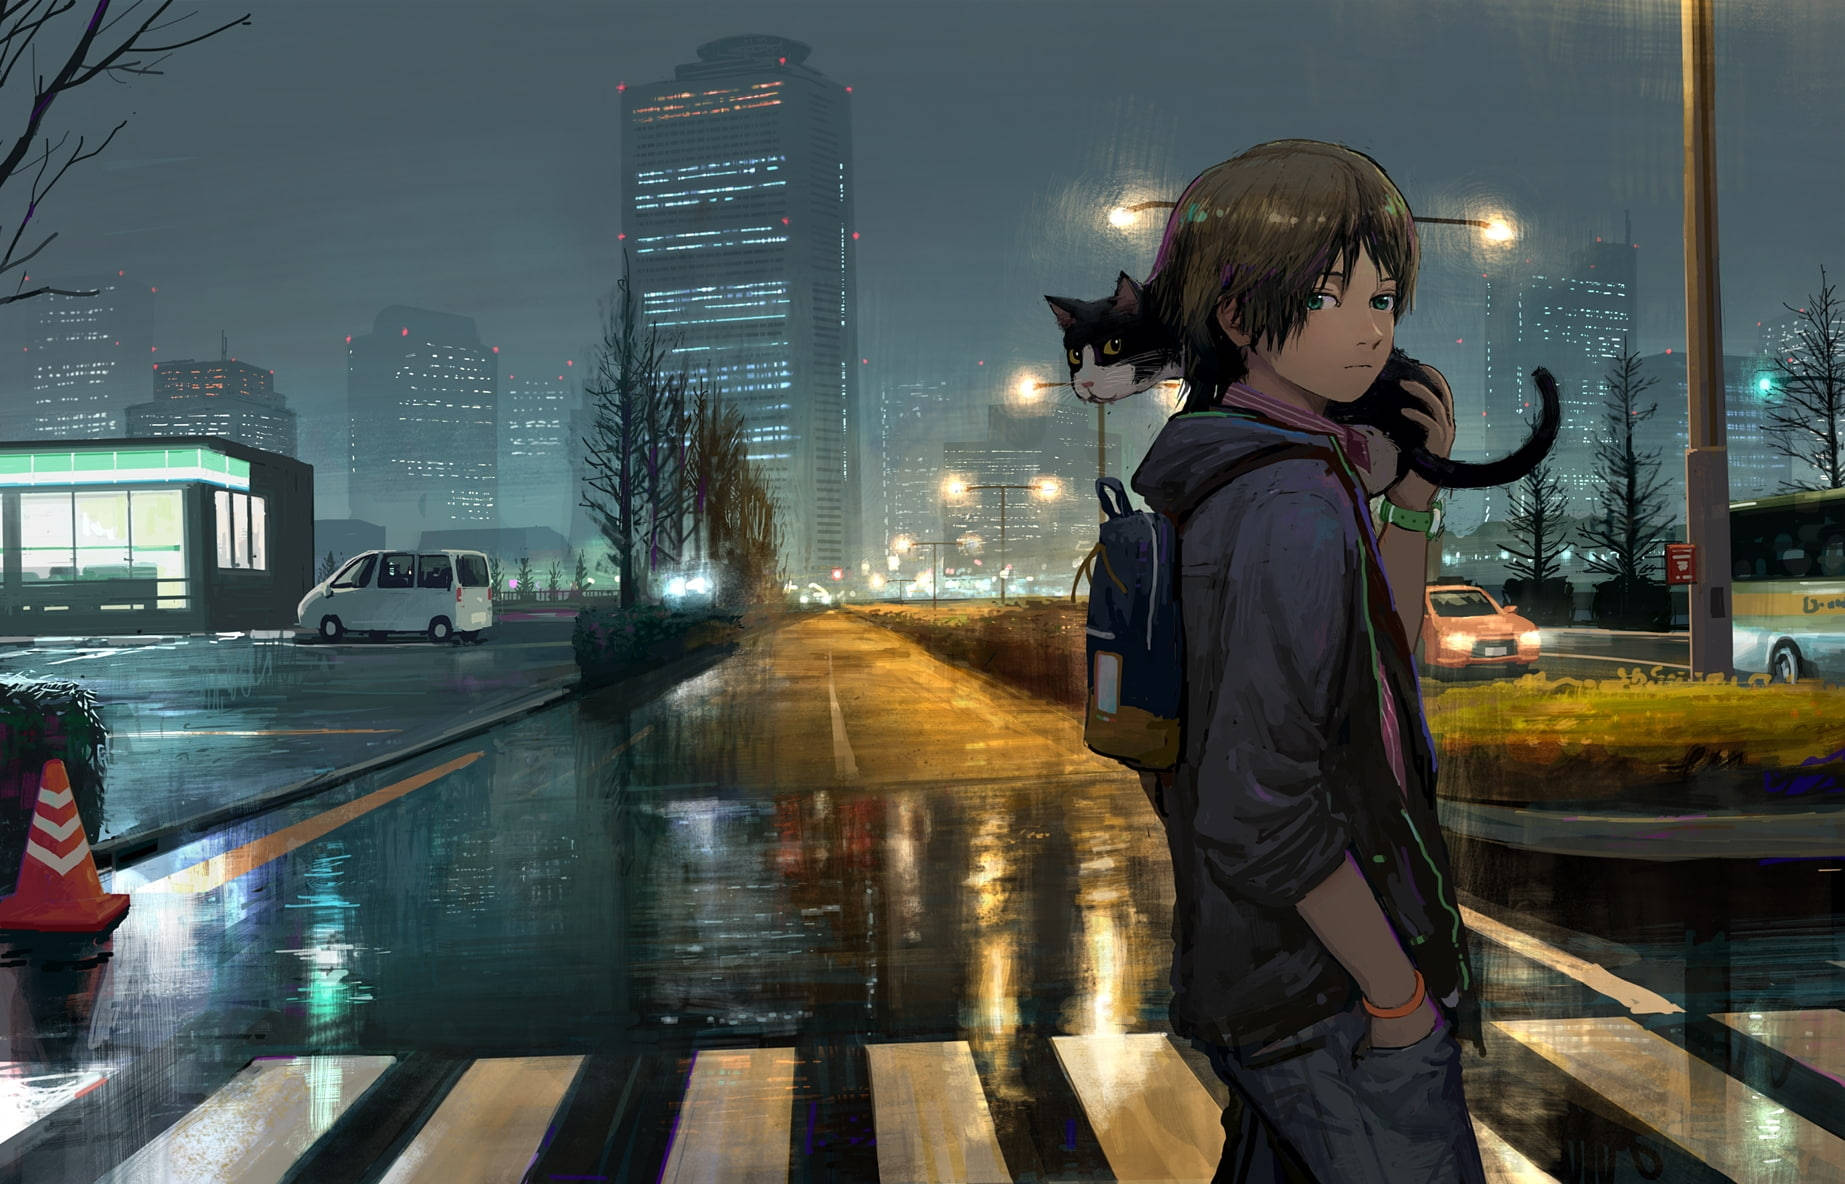 Cute Anime Boy Carrying A Cat In The Streets Wallpaper